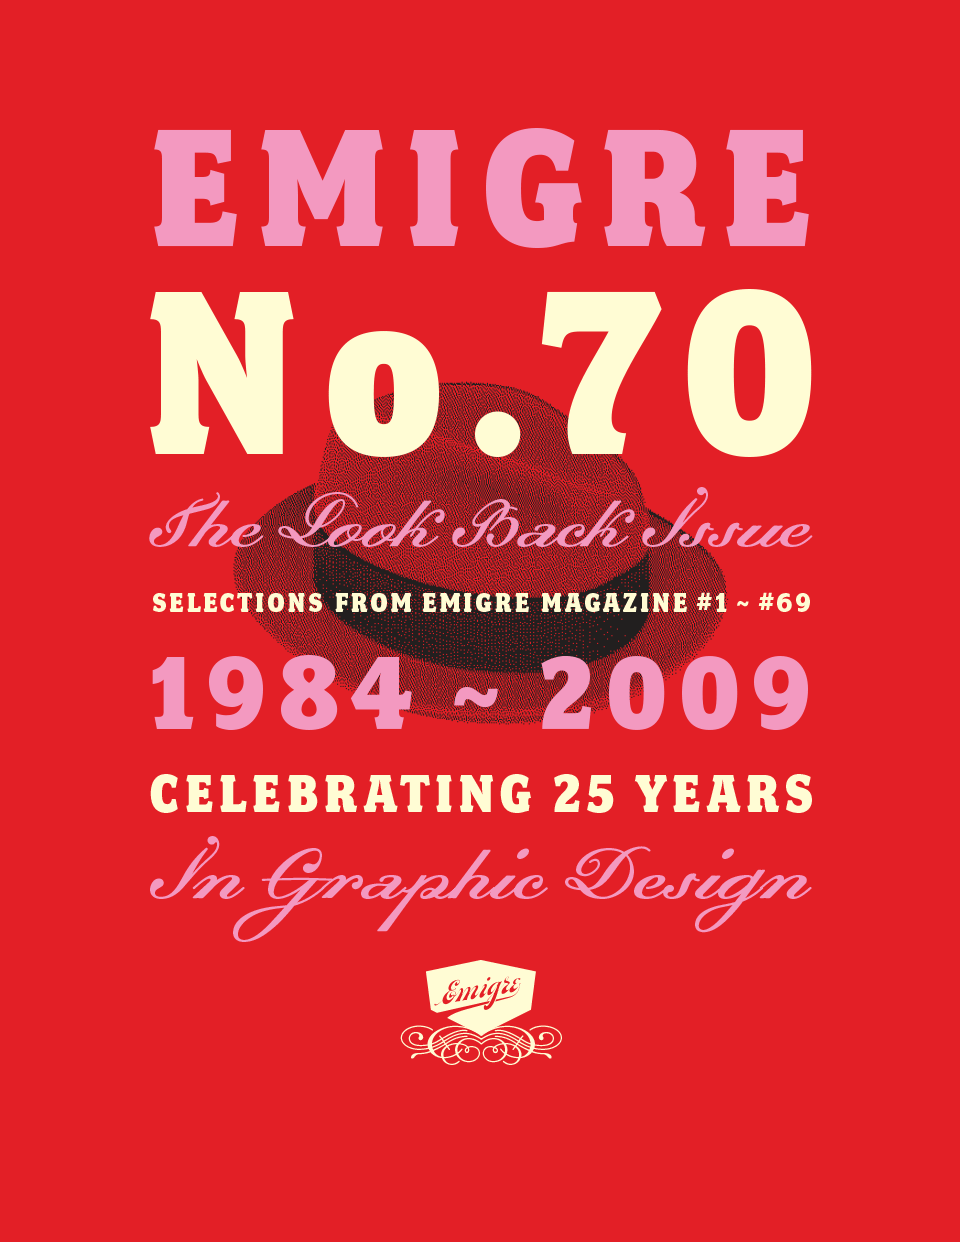 Emigre No. 70: The Look Back Issue - Selections from Emigre magazine #1 - #69